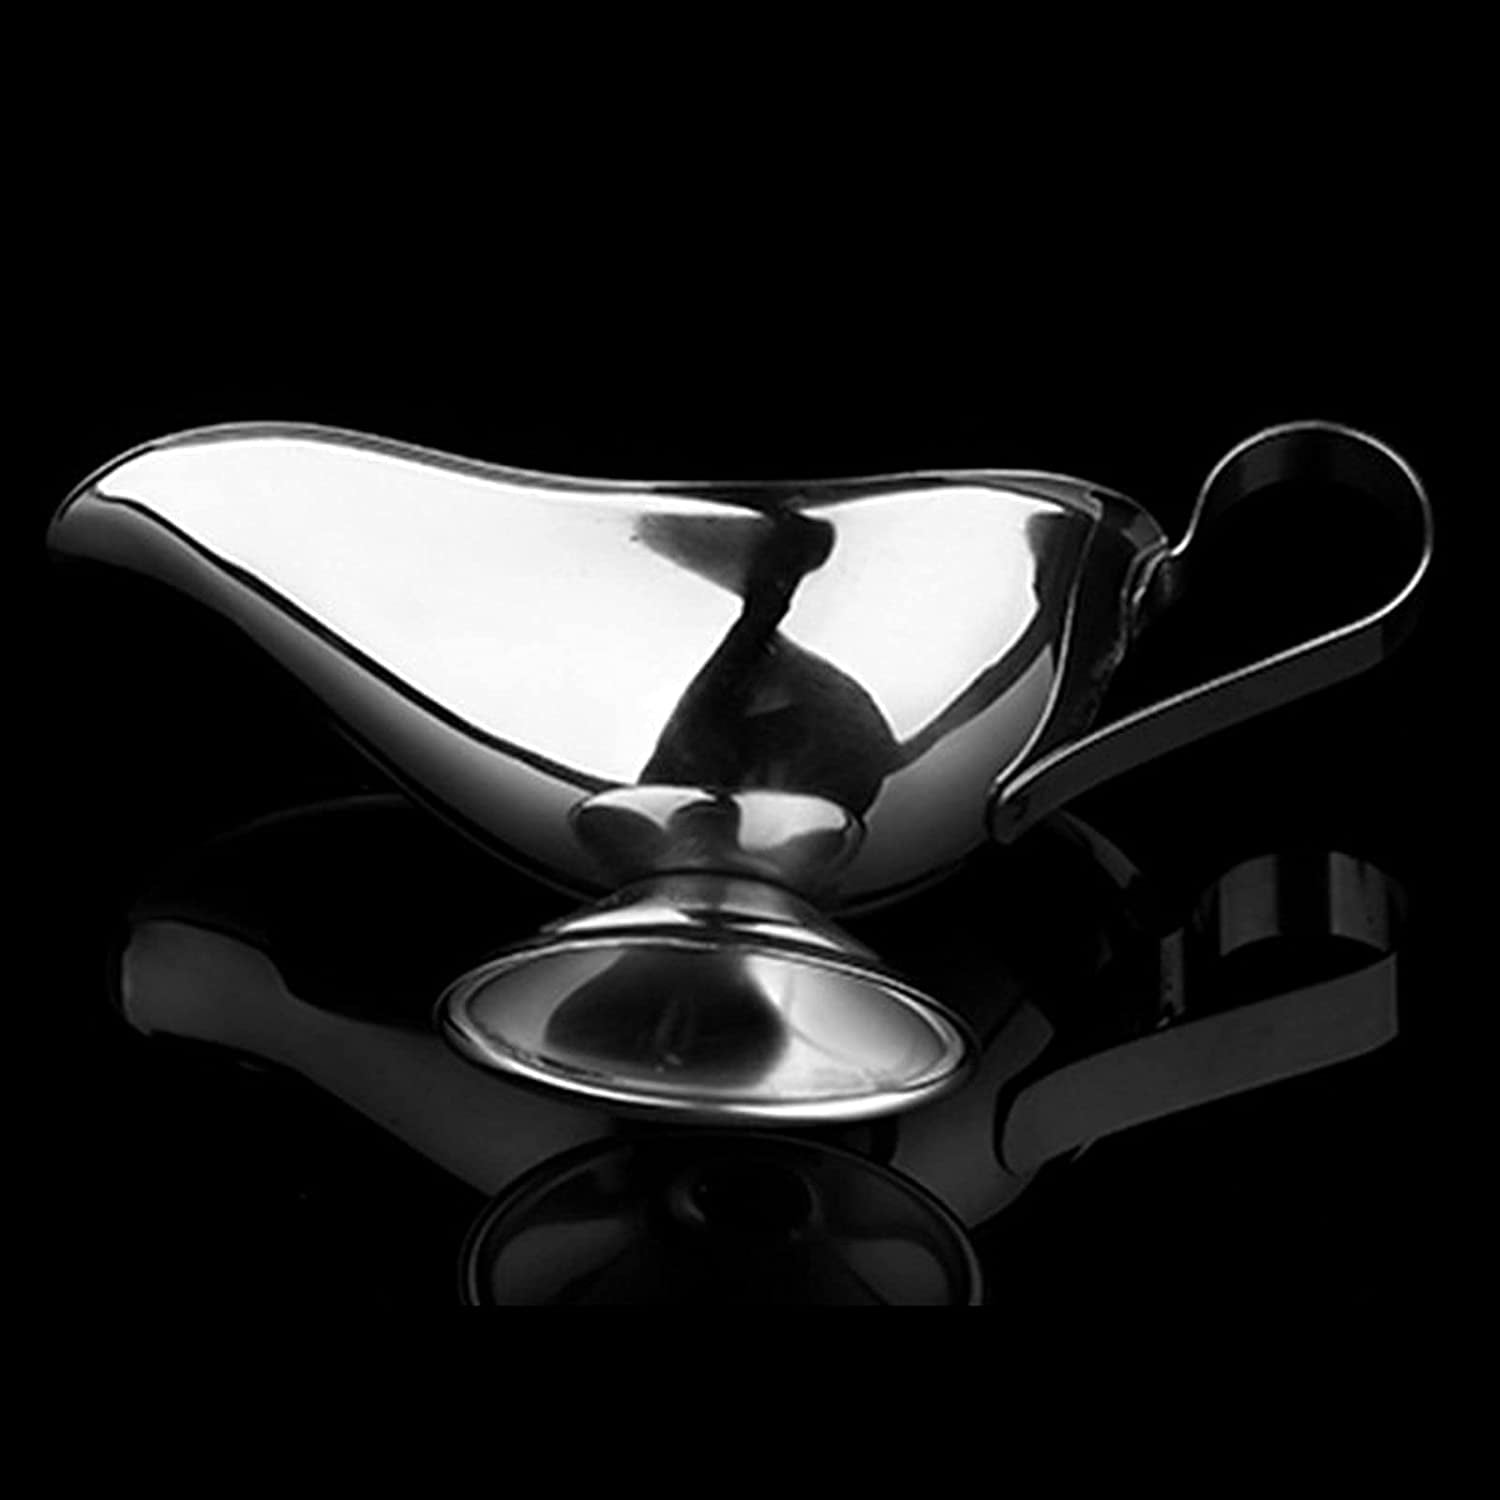 Durable Gravity Boat Sauce Tank Pitcher Gravy Boat Serving Pitcher Milk Creamer Pitcher Cream Pitcher Duckbill-shaped Sauce Gate Design Is Made of Stainless Steel Size : Small 